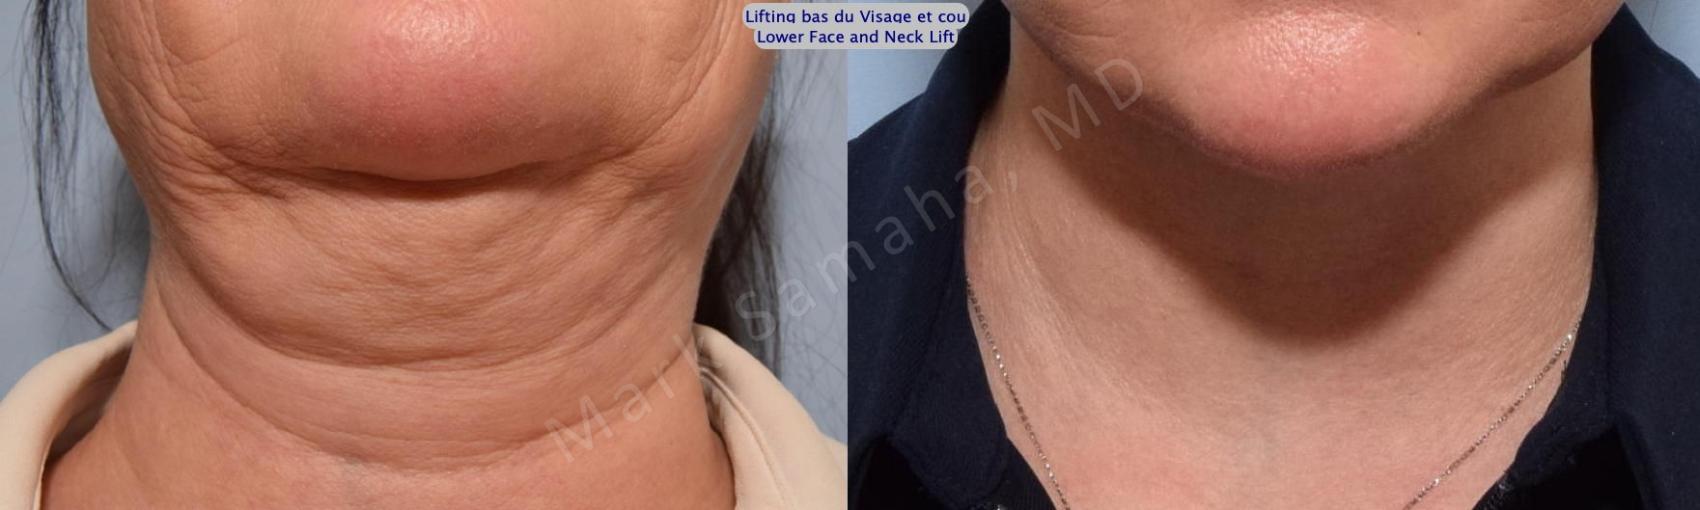 Before & After Lifting du visage / Cou - Facelift / Necklift Case 153 Basal View in Montreal, QC